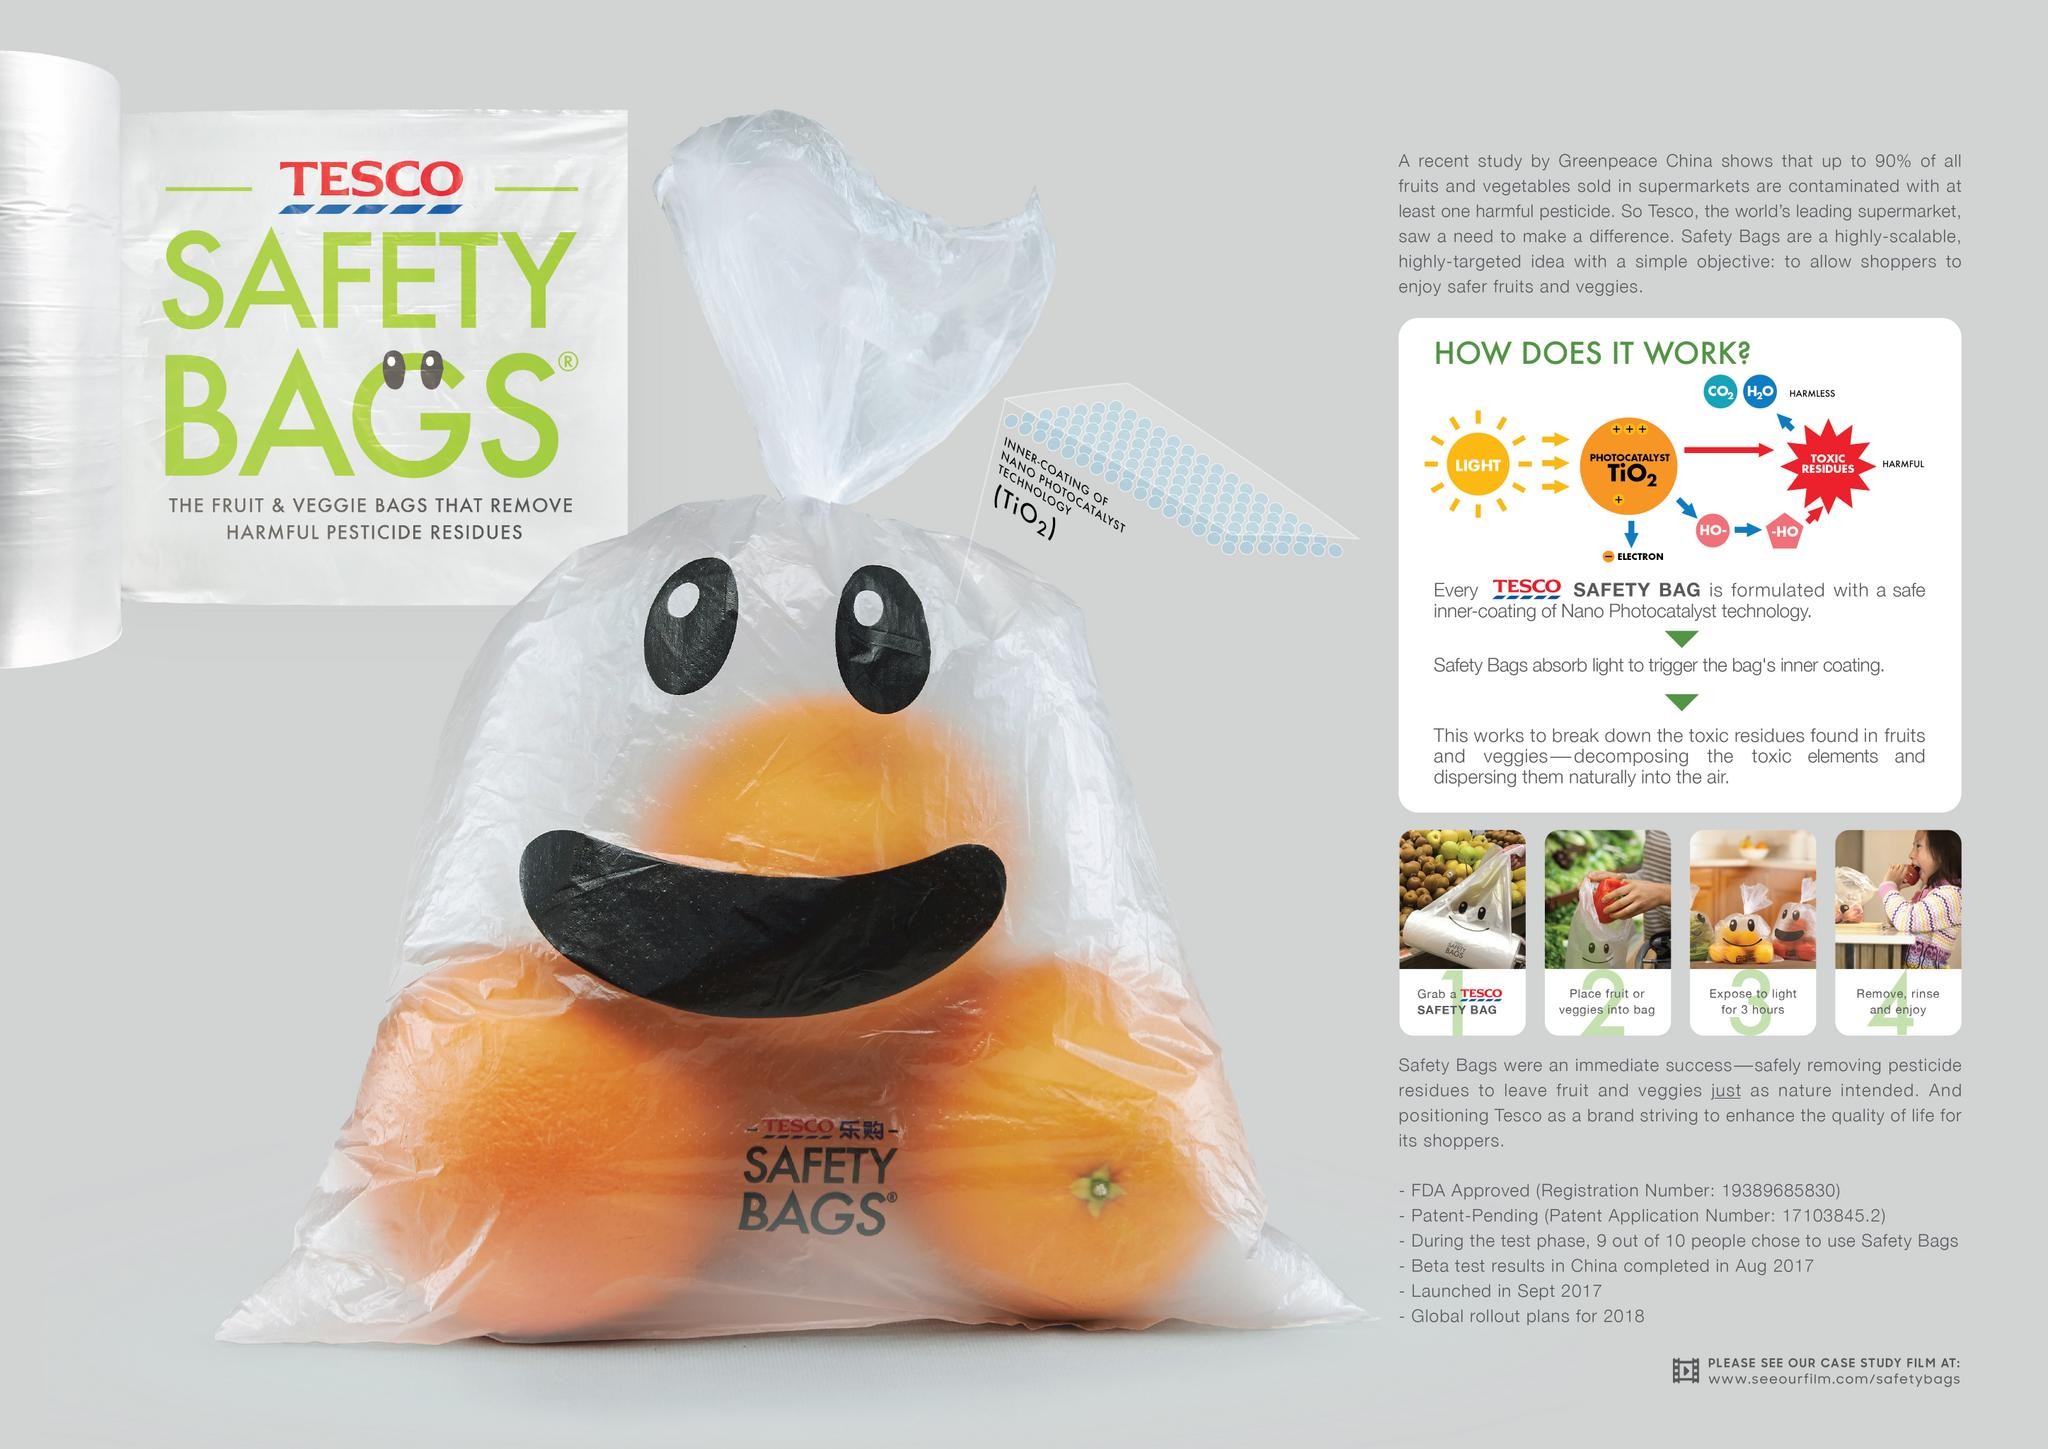 SAFETY BAGS